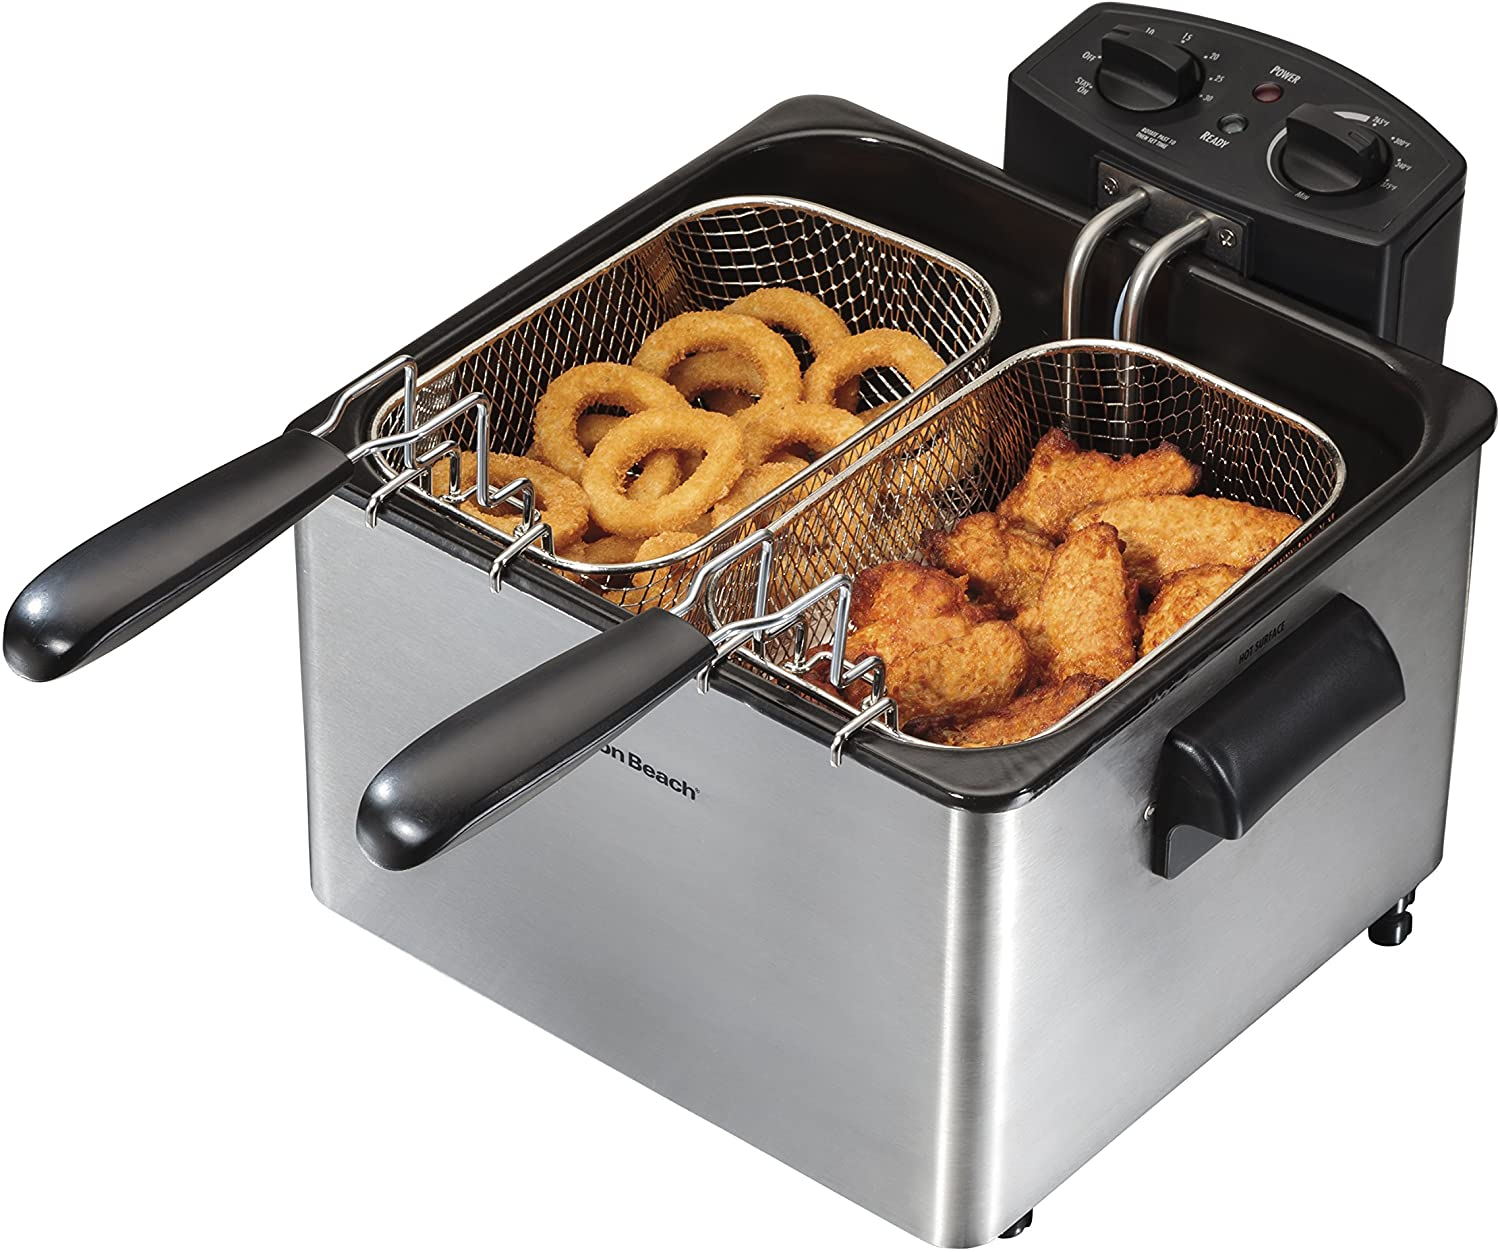 Hamilton Beach Deep Fryer with 2 Frying Baskets, 19 Cups / 4.5 Liters Oil Capacity, Lid with View Window, Professional Grade, Electric, 1800 Watts, Stainless Steel (35036)